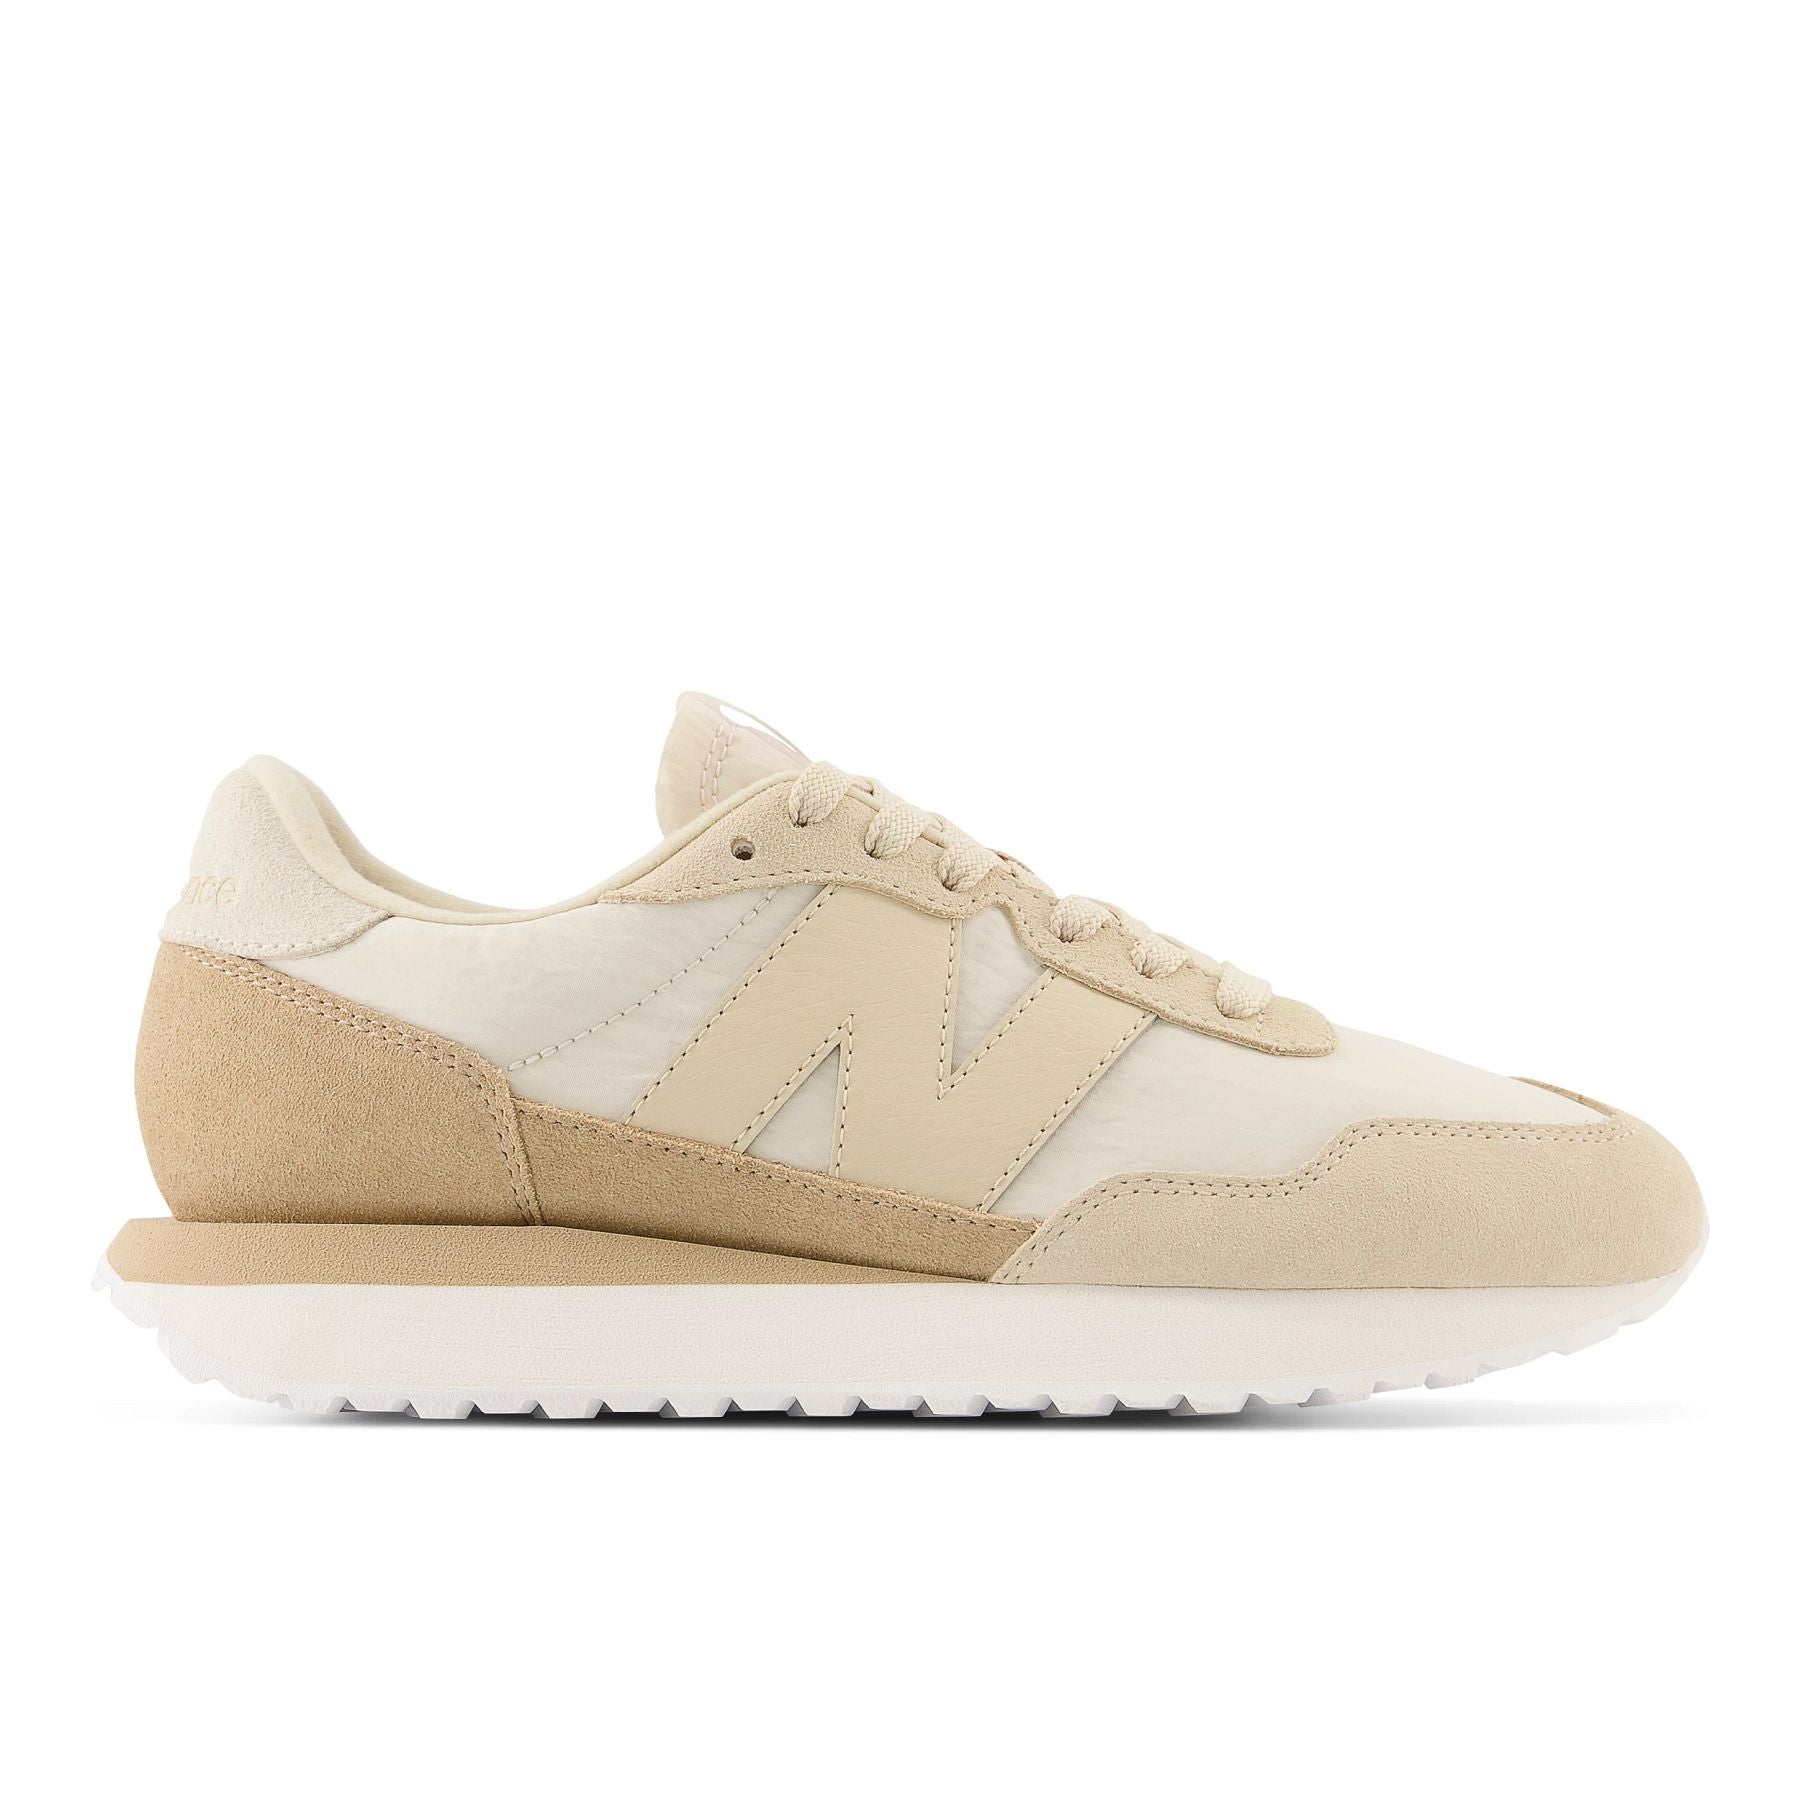 Lateral view of the Women's New Balance lifestyle 237 shoe in Beige